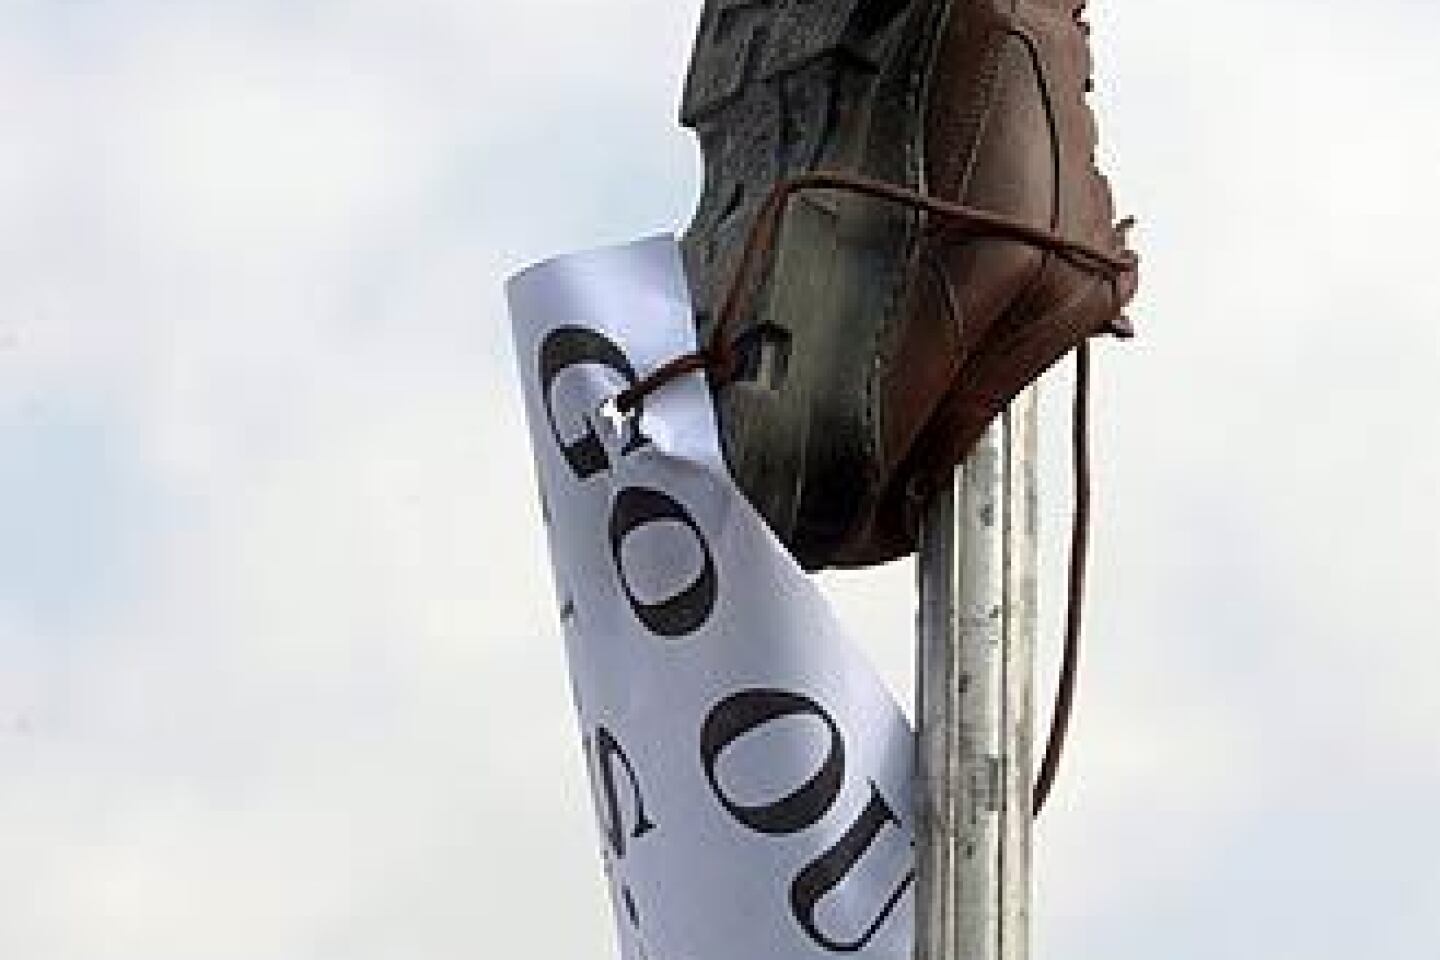 A shoe and a sign reading "Go out USA" is placed on a pole in Sadr City as Iraqis protest President Bush's farewell visit and the arrest of an Iraqi journalist who threw his shoes at the president during a news conference in Baghdad.